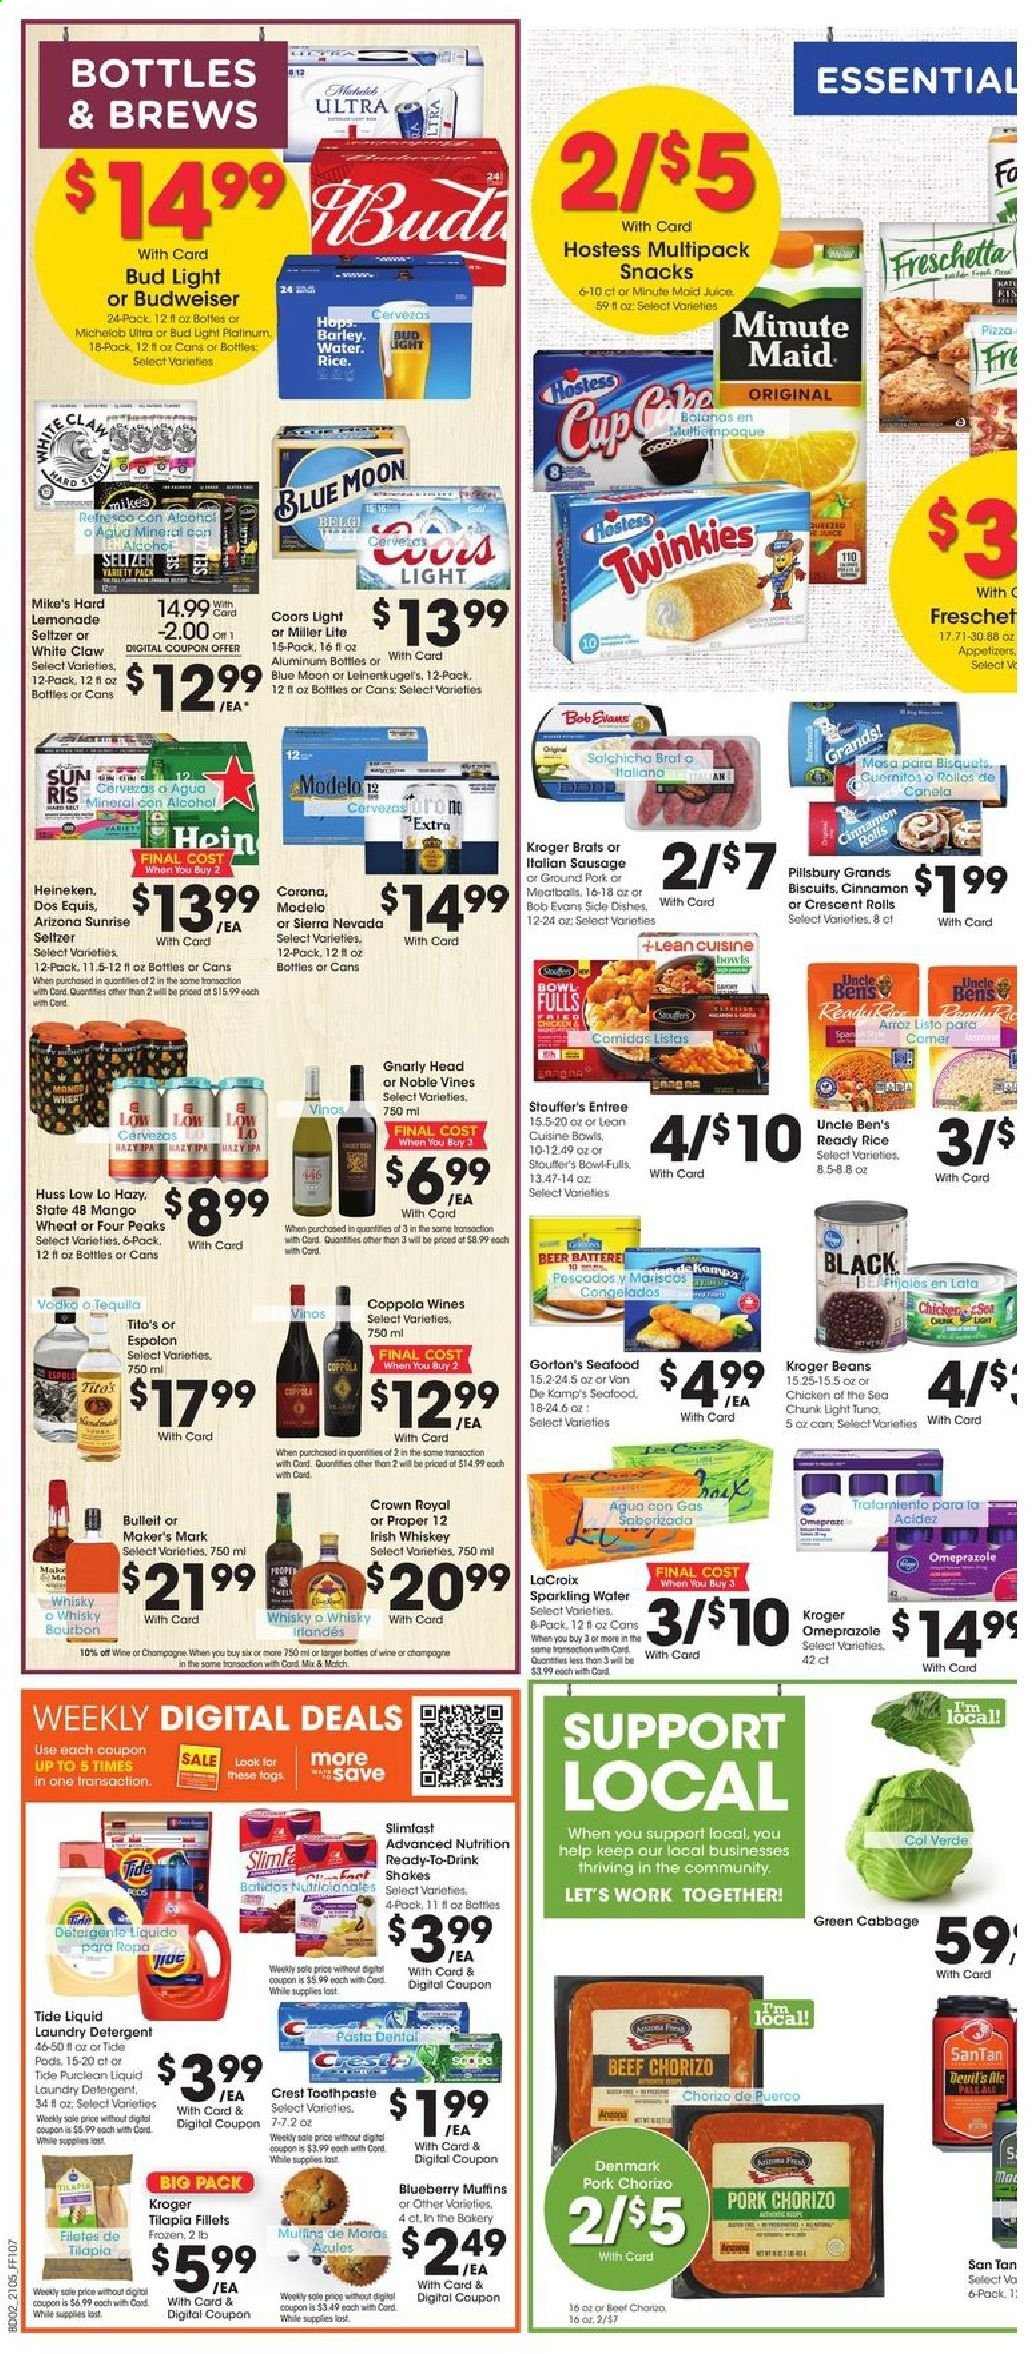 thumbnail - Fry’s Flyer - 03/03/2021 - 03/09/2021 - Sales products - cinnamon roll, crescent rolls, muffin, tilapia, seafood, Van de Kamp's, Gorton's, pizza, meatballs, Pillsbury, Lean Cuisine, Slimfast, bowl-fulls, Bob Evans, chorizo, sausage, italian sausage, shake, beans, mango, Stouffer's, biscuit, snack, light tuna, Uncle Ben's, Chicken of the Sea, pasta, lemonade, juice, AriZona, seltzer water, sparkling water, champagne, wine, alcohol, bourbon, whiskey, White Claw, beer, Budweiser, Miller Lite, Coors, Dos Equis, Blue Moon, Michelob, Bud Light, Corona Extra, Heineken, Modelo, ground pork, detergent, Tide, laundry detergent, toothpaste, Crest, cup. Page 4.